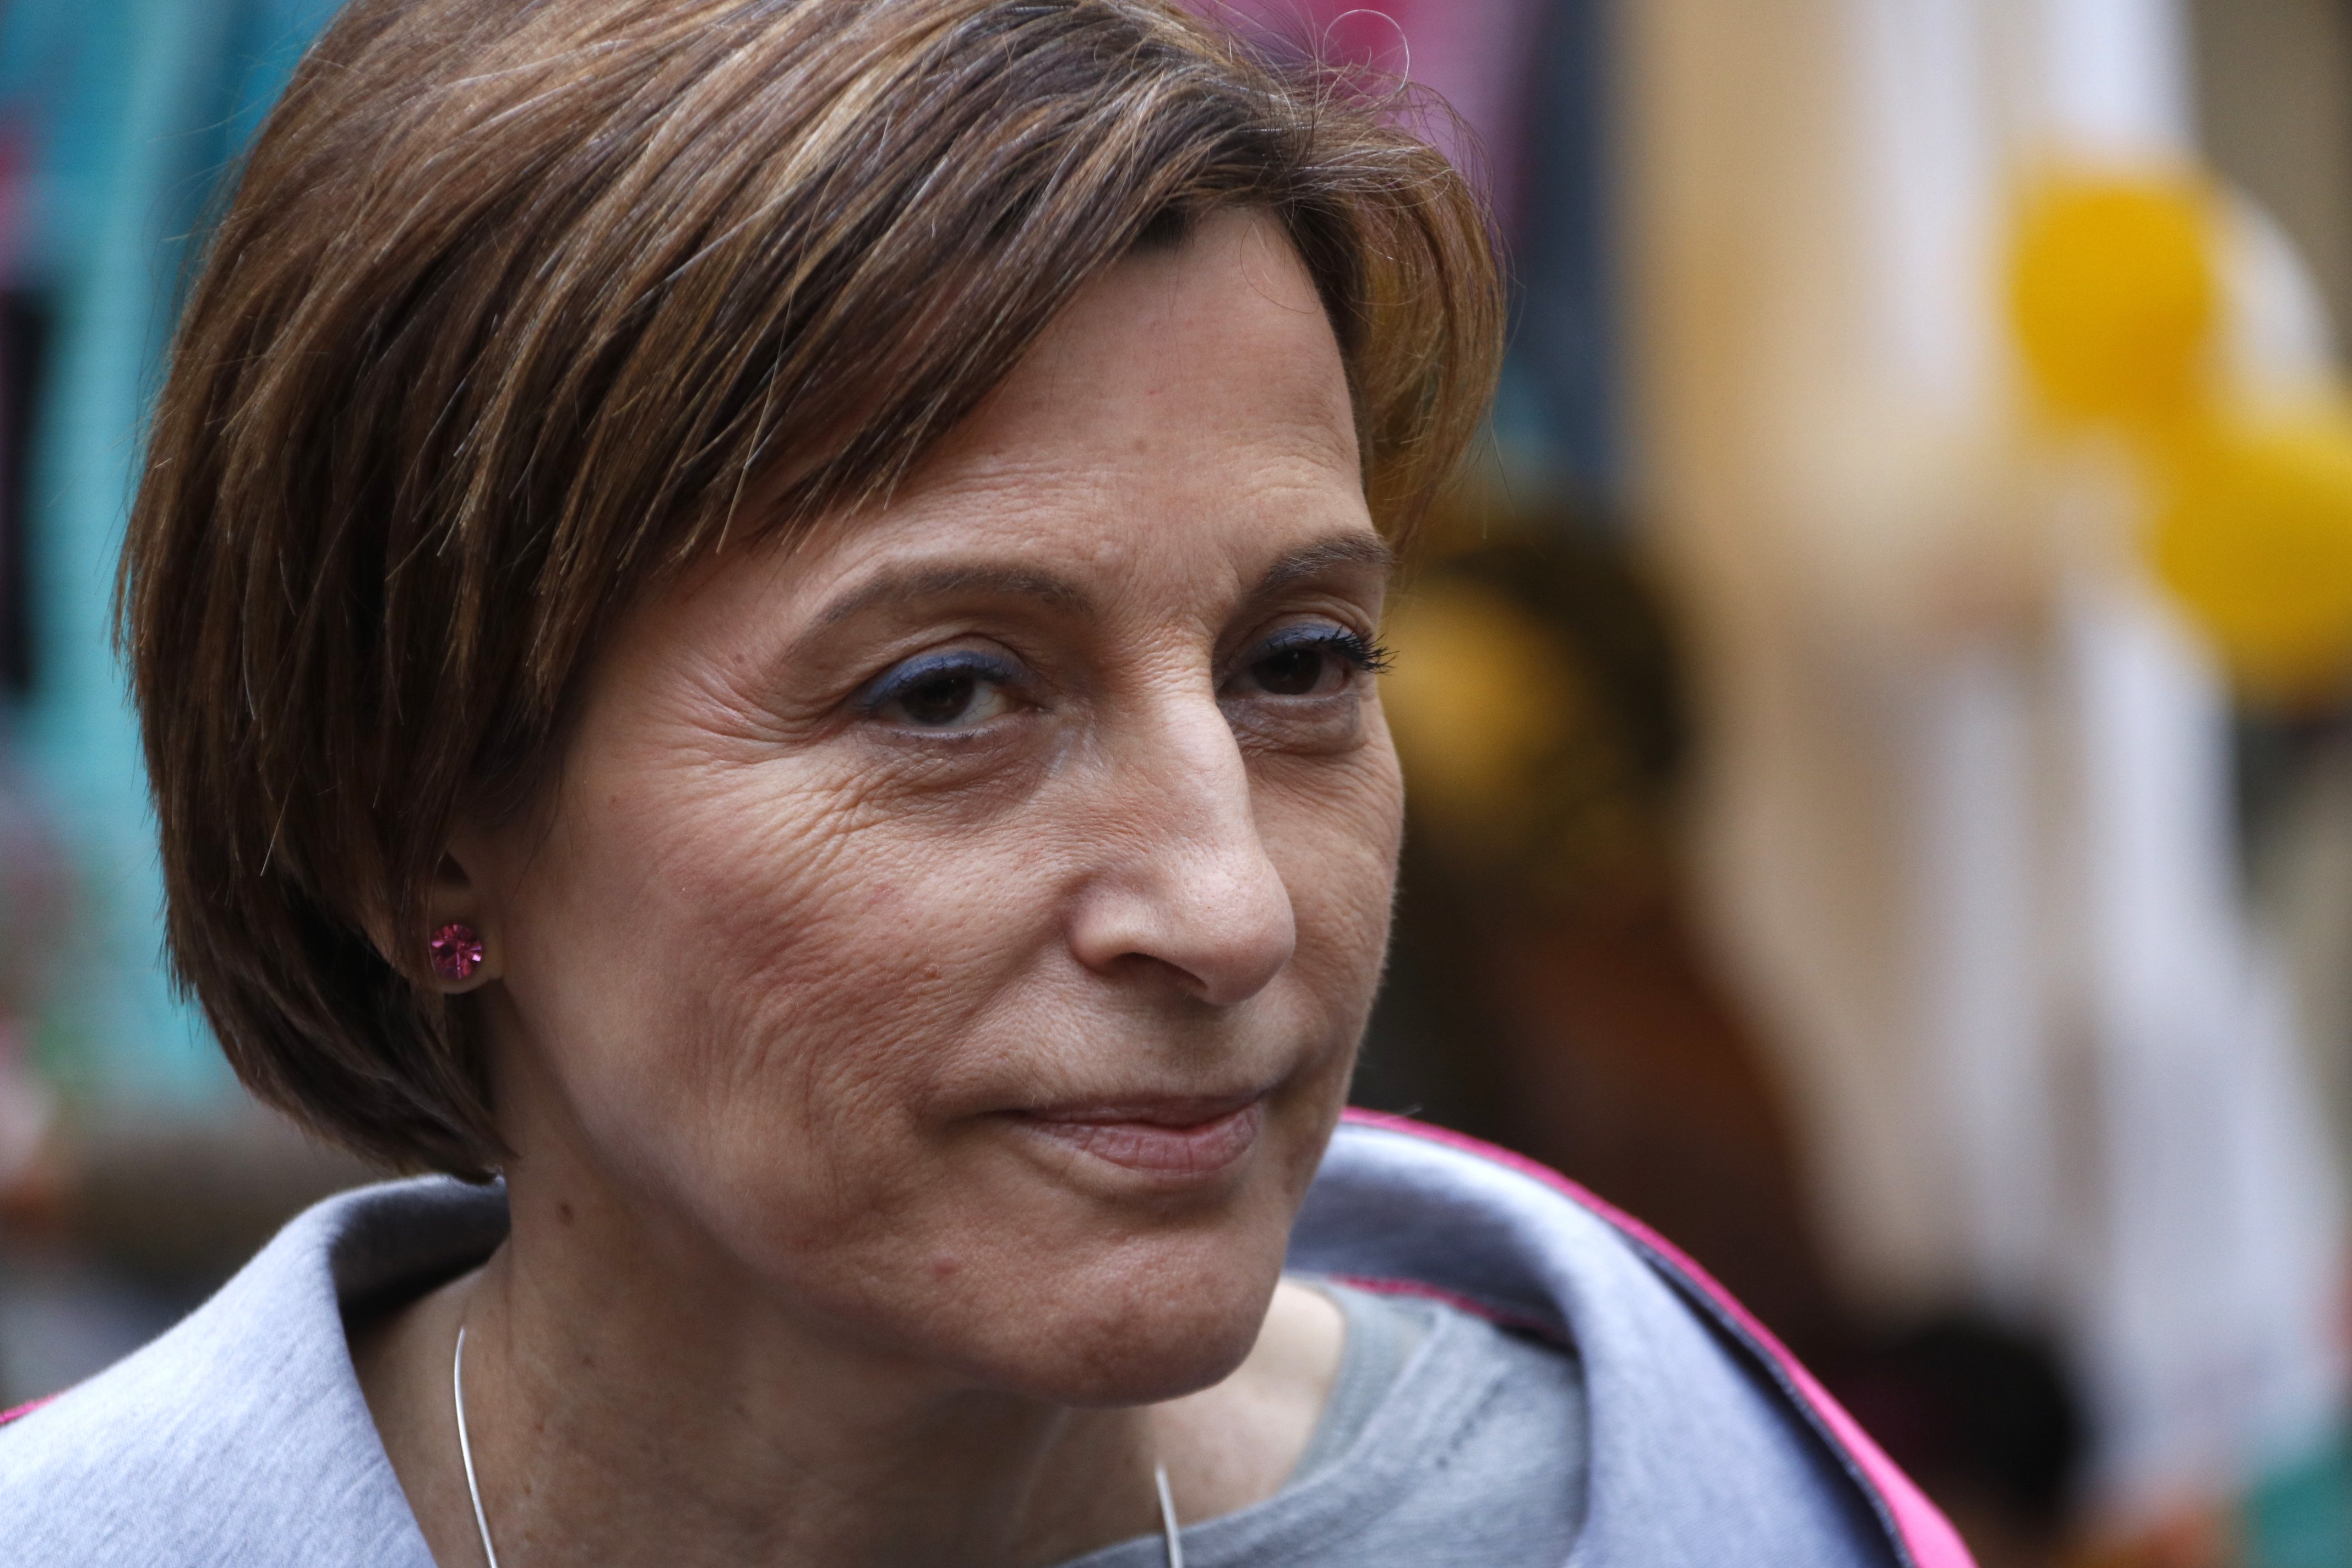 Referendum case audio | Forcadell: "I would renounce my beliefs if they entailed violence"